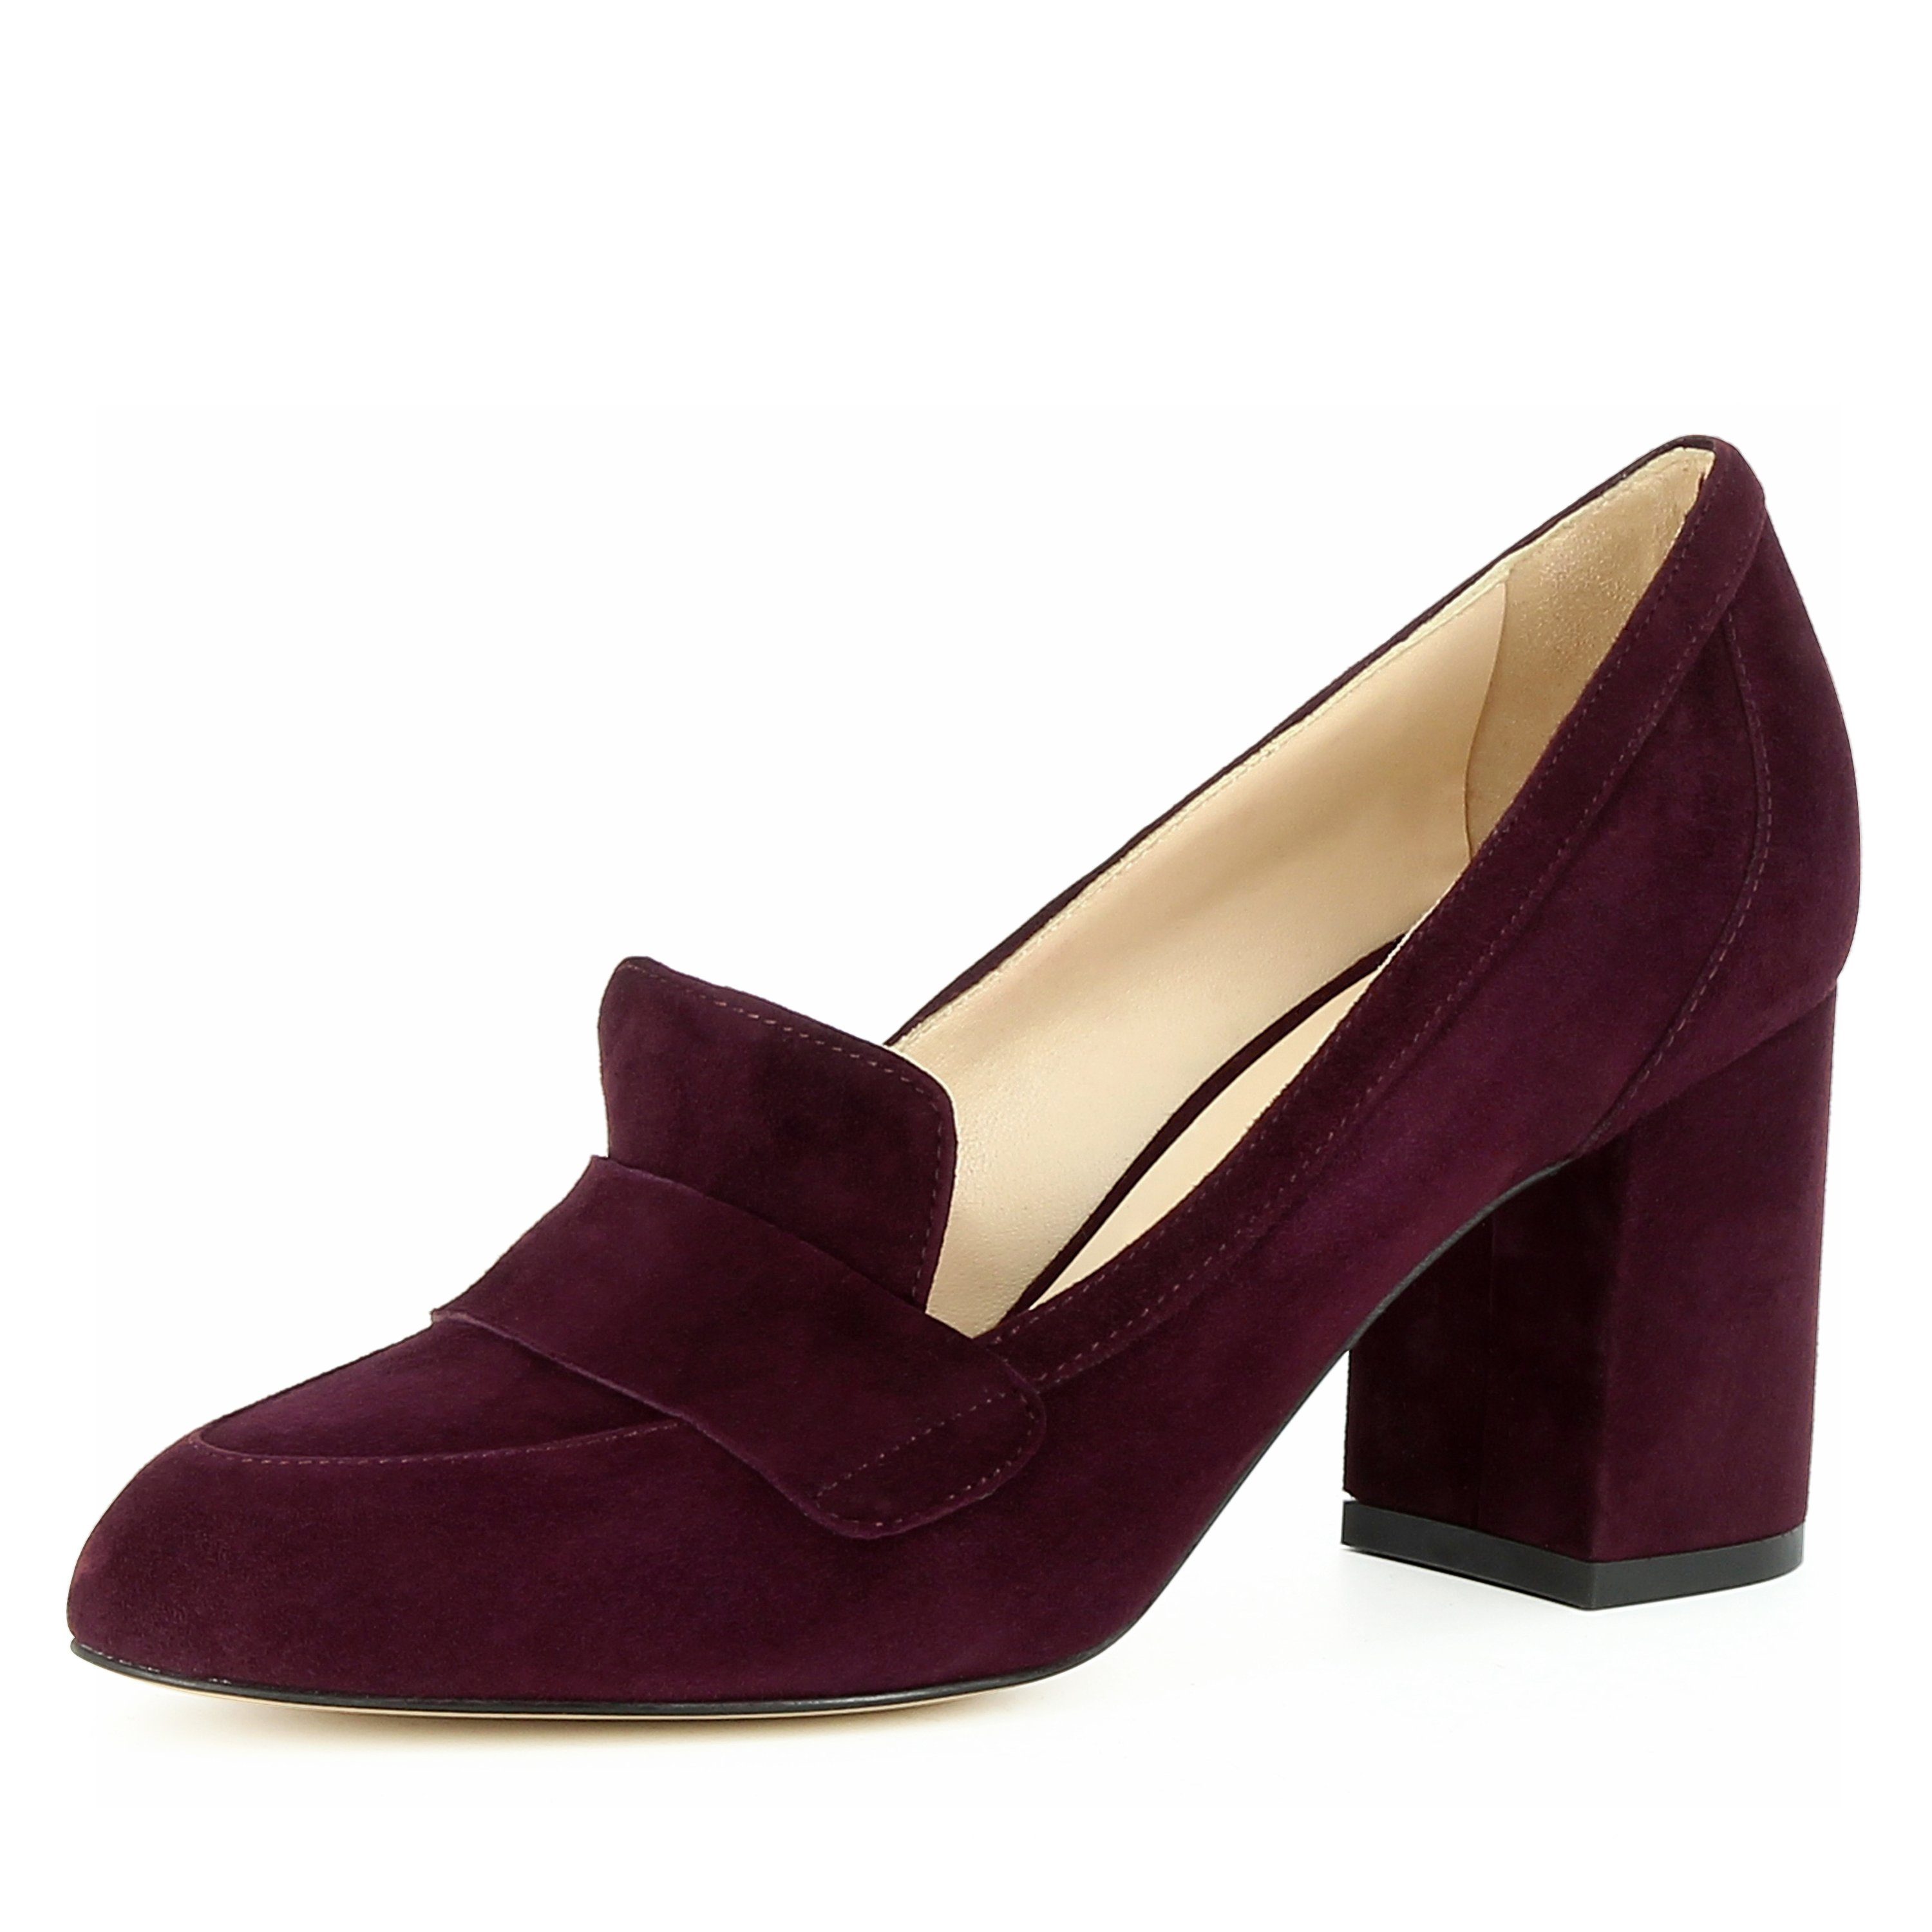 Evita NELLY Pumps Handmade in Italy bordeaux | Pumps